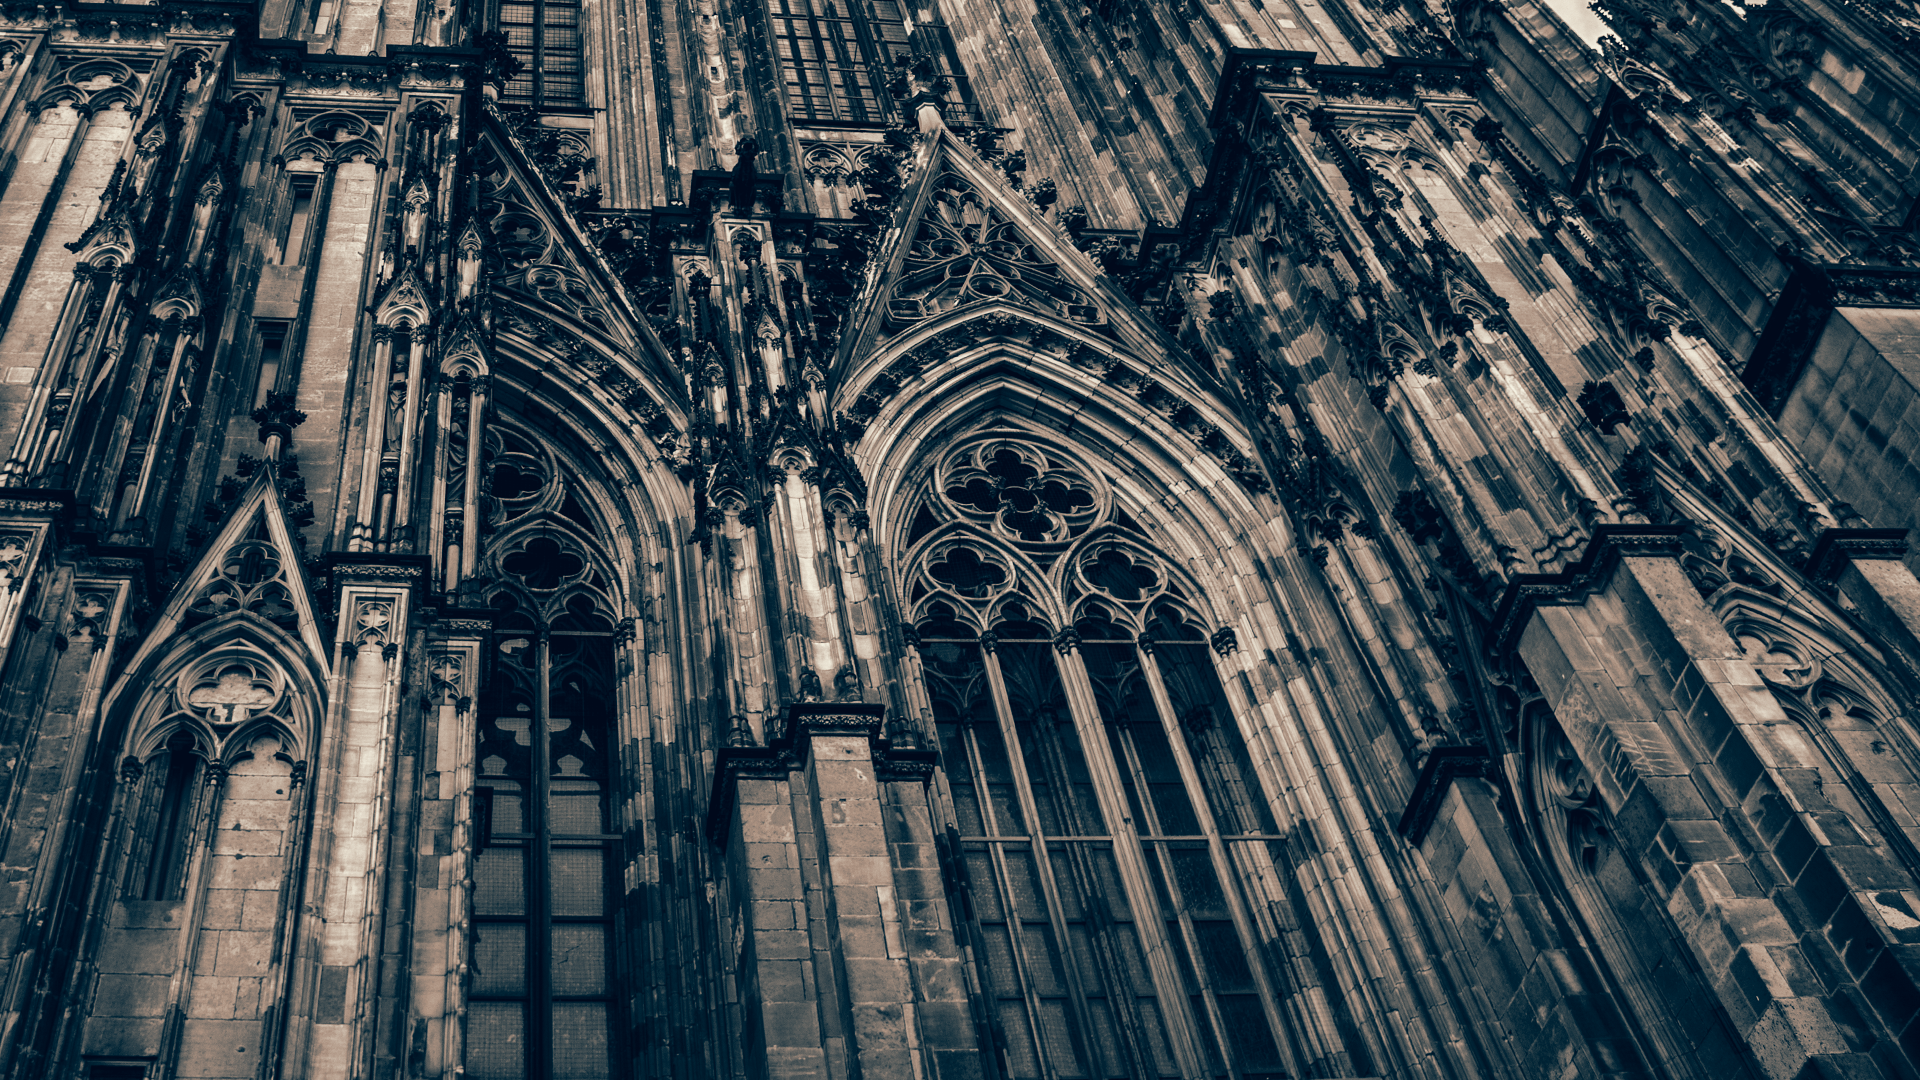 Monochrome city architecture building symmetry skyscraper cathedral metropolis cologne cathedral cologne gothic architecture line facade urban area place of worship